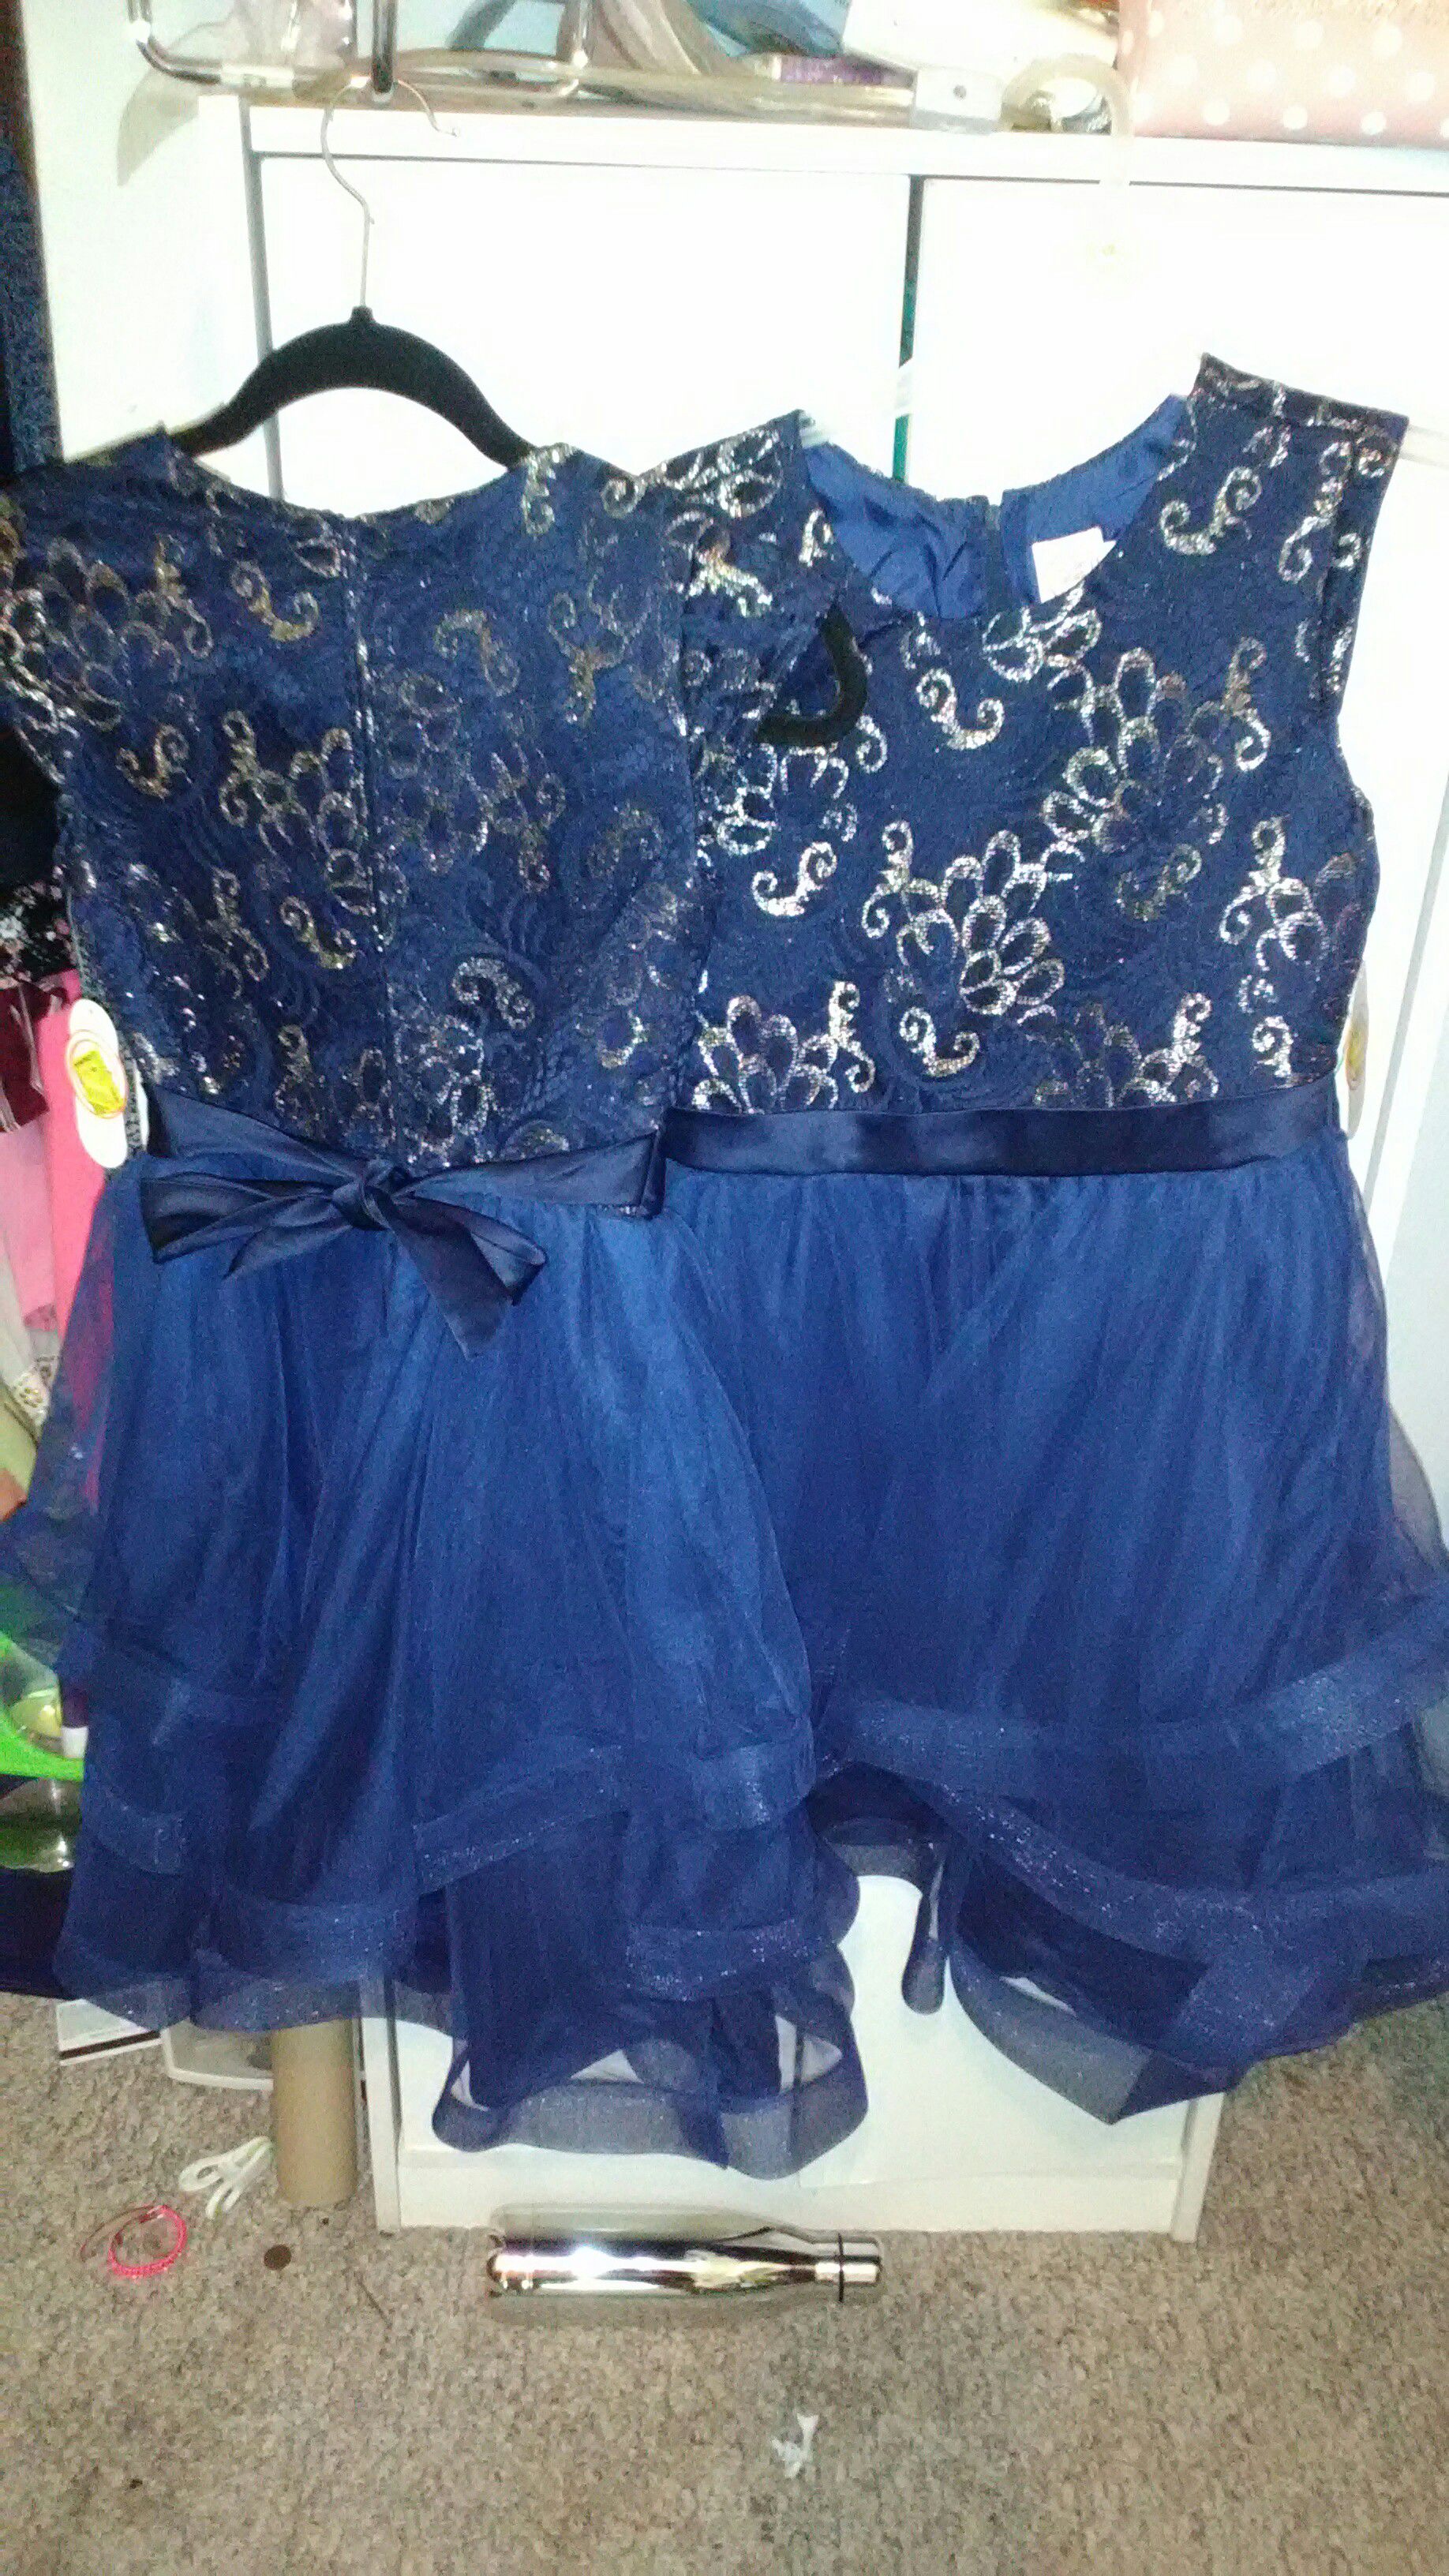 Blue Pretty Dress with gold trim, Smoke Free Home... Bought For Wedding and didn't use them.